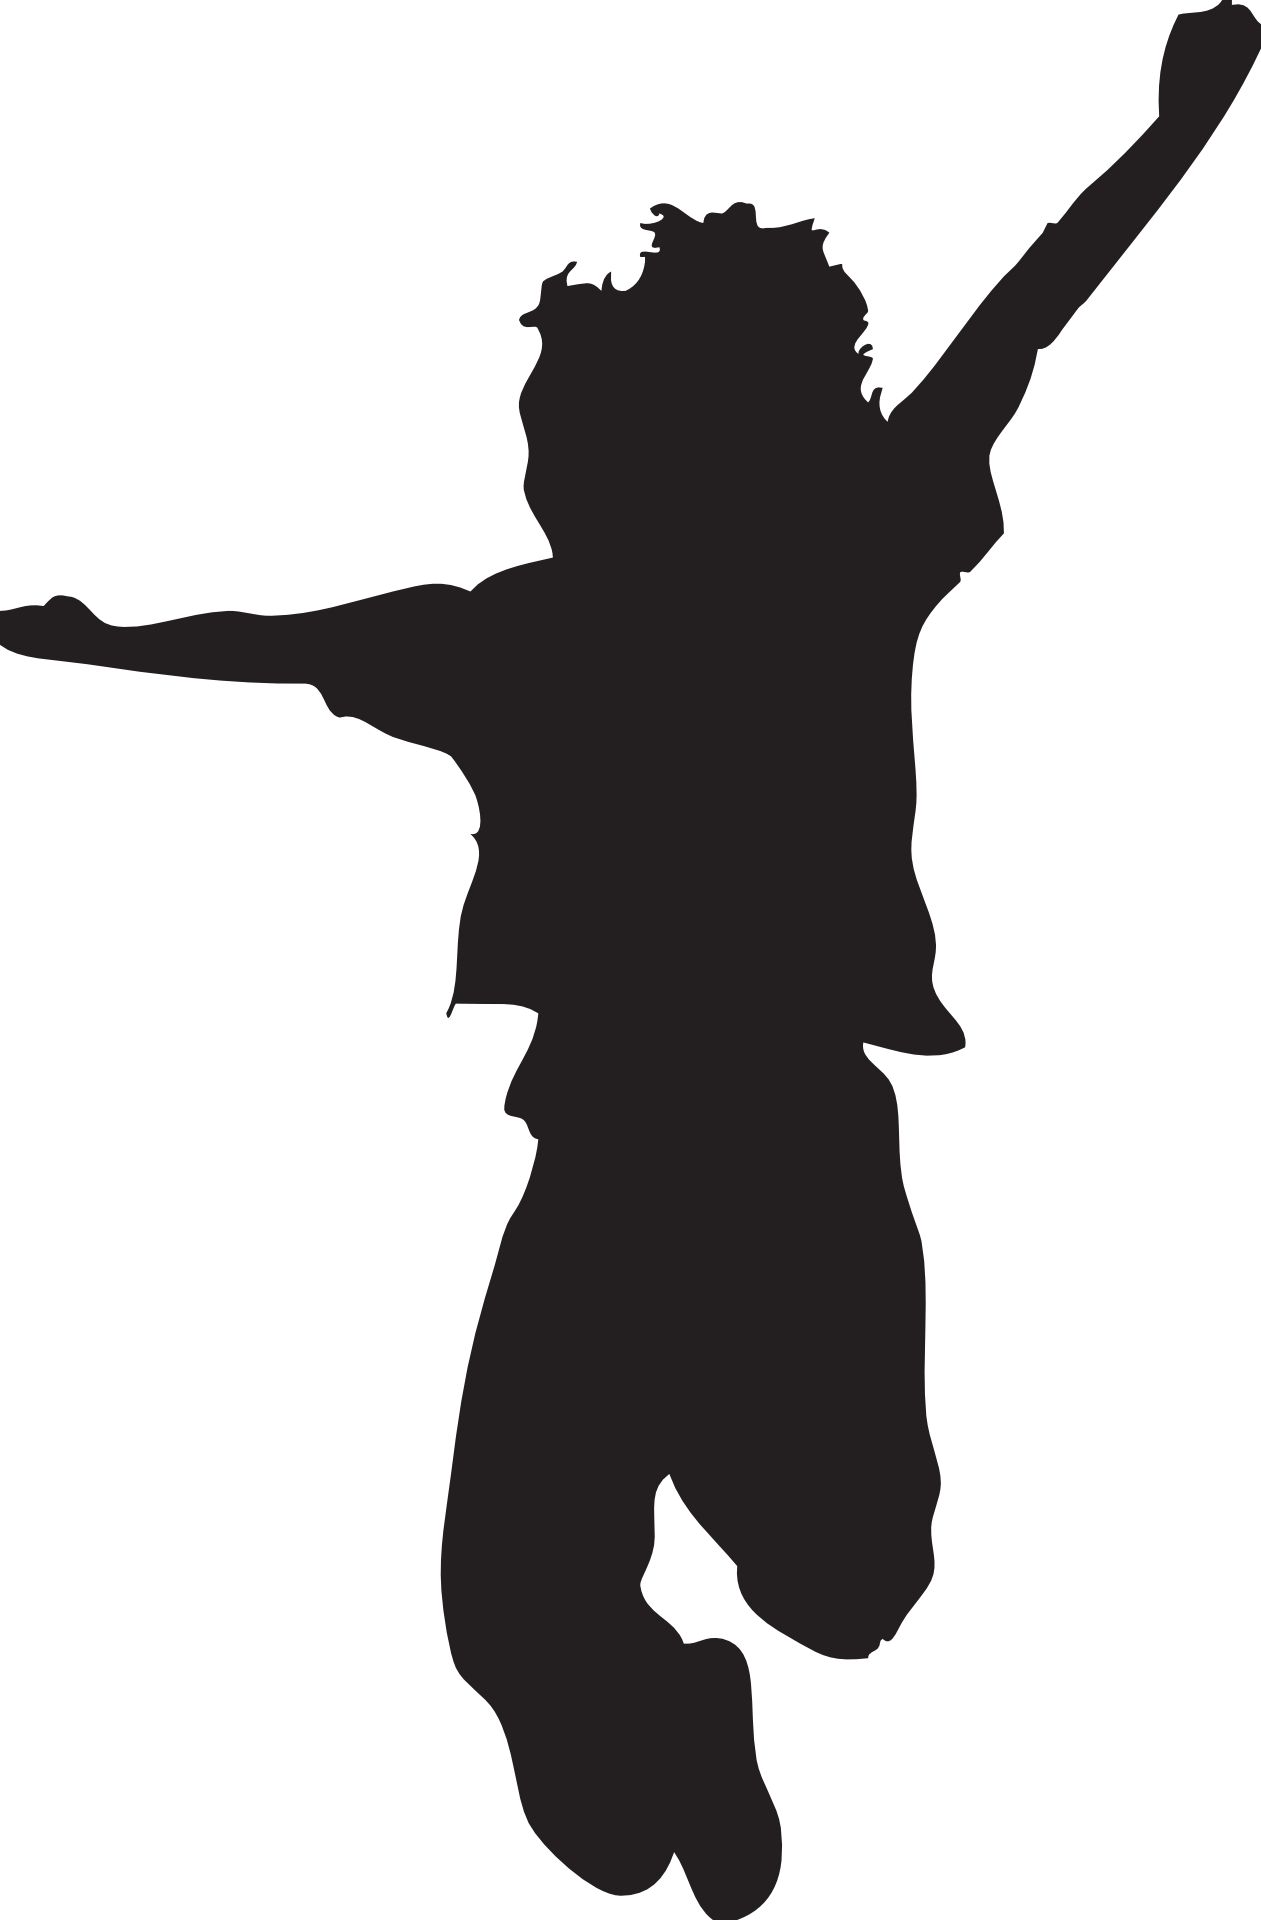 Jumping silhouette clipart.